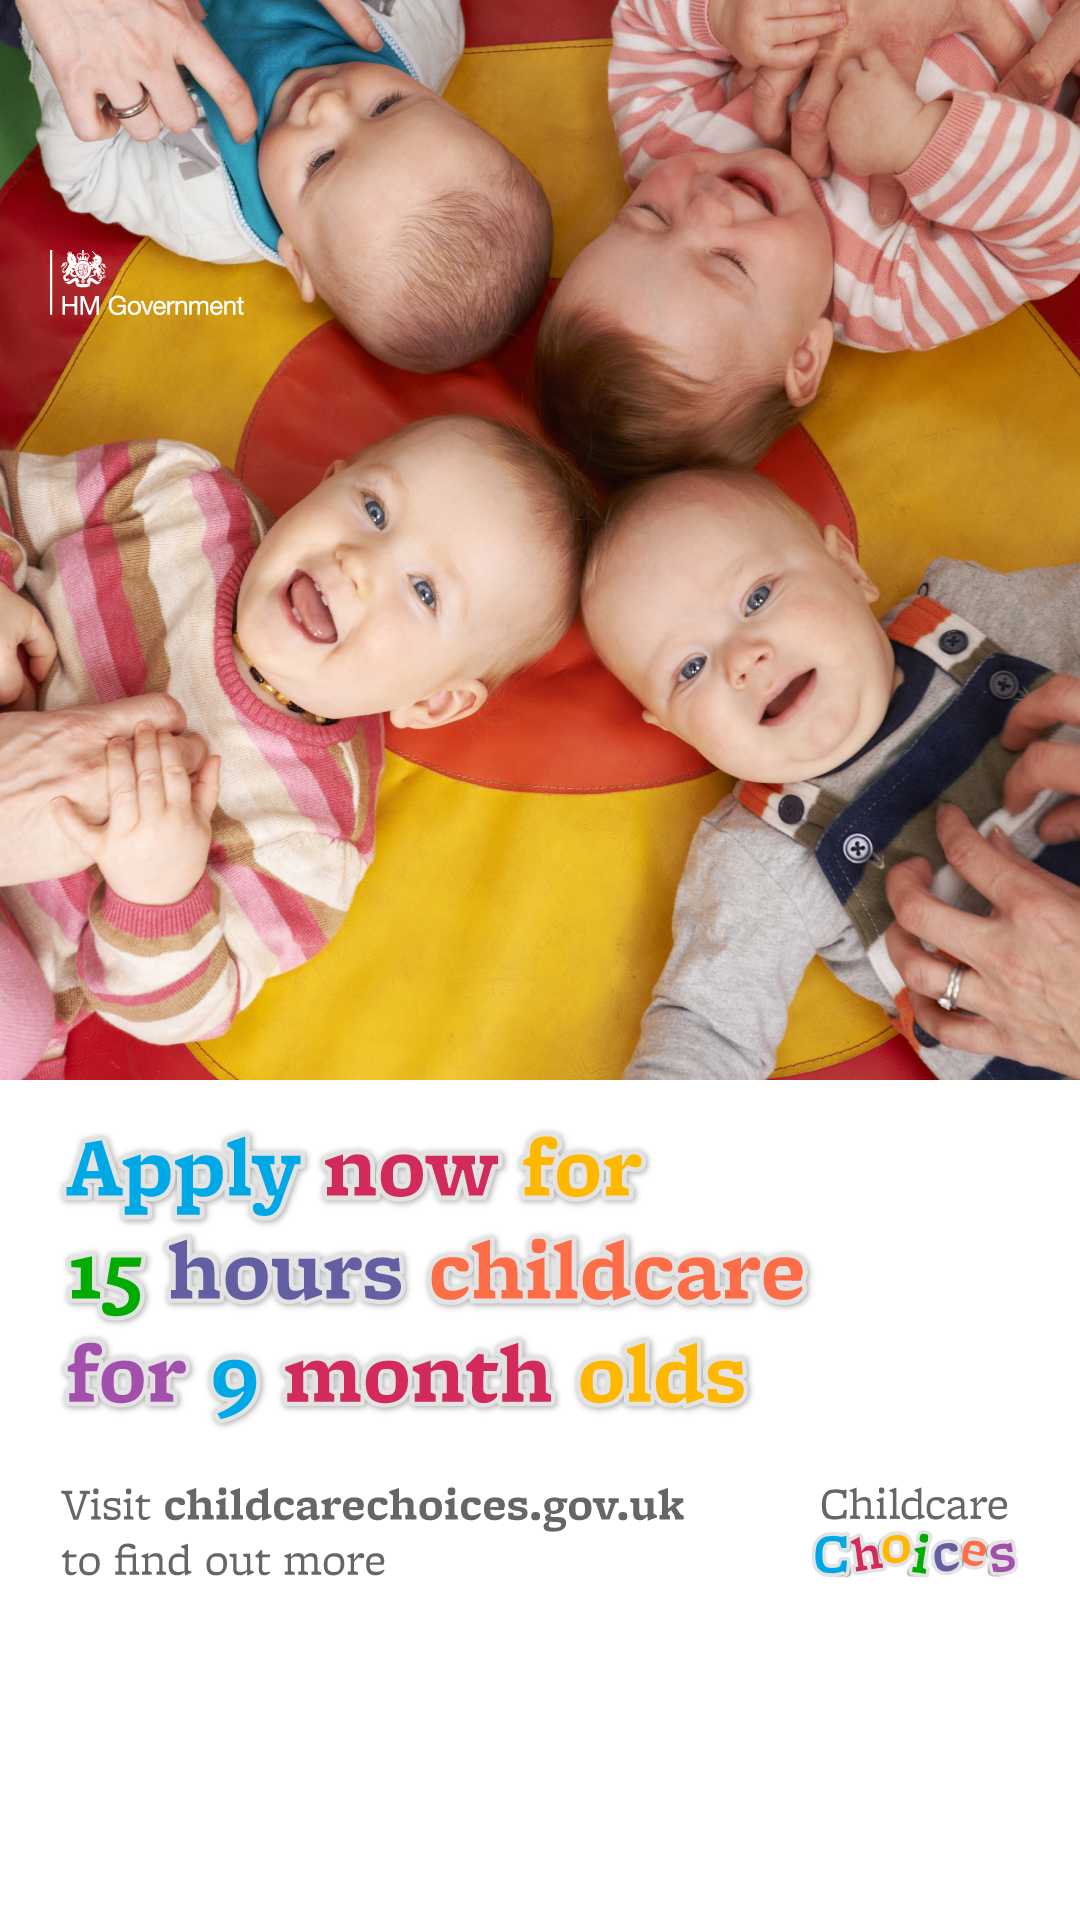 Four babies in a childcare setting